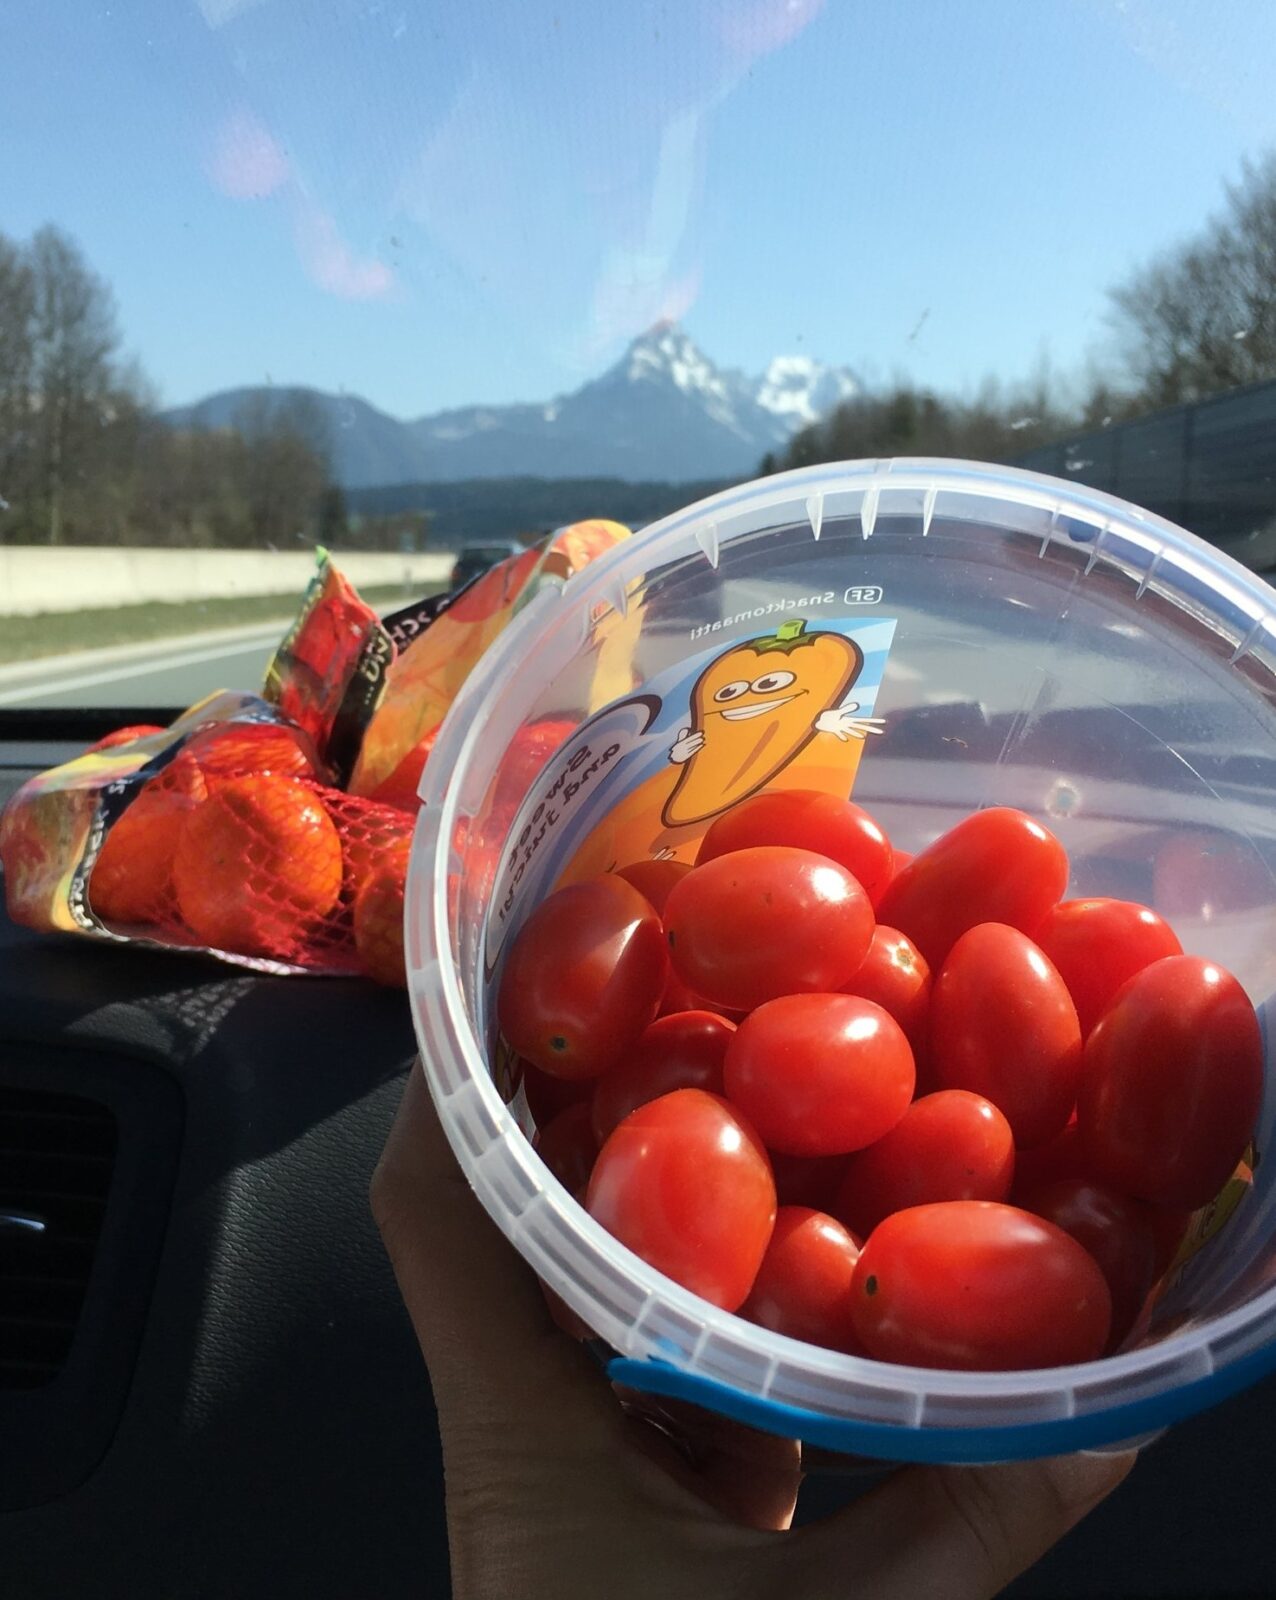 Road trip snacks of strawberries, mandarins and cherry tomatoes help me stay balanced and get enough fruit and veg - this is definitely part of my healthy travel tips list. Image: Lyndi Cohen 